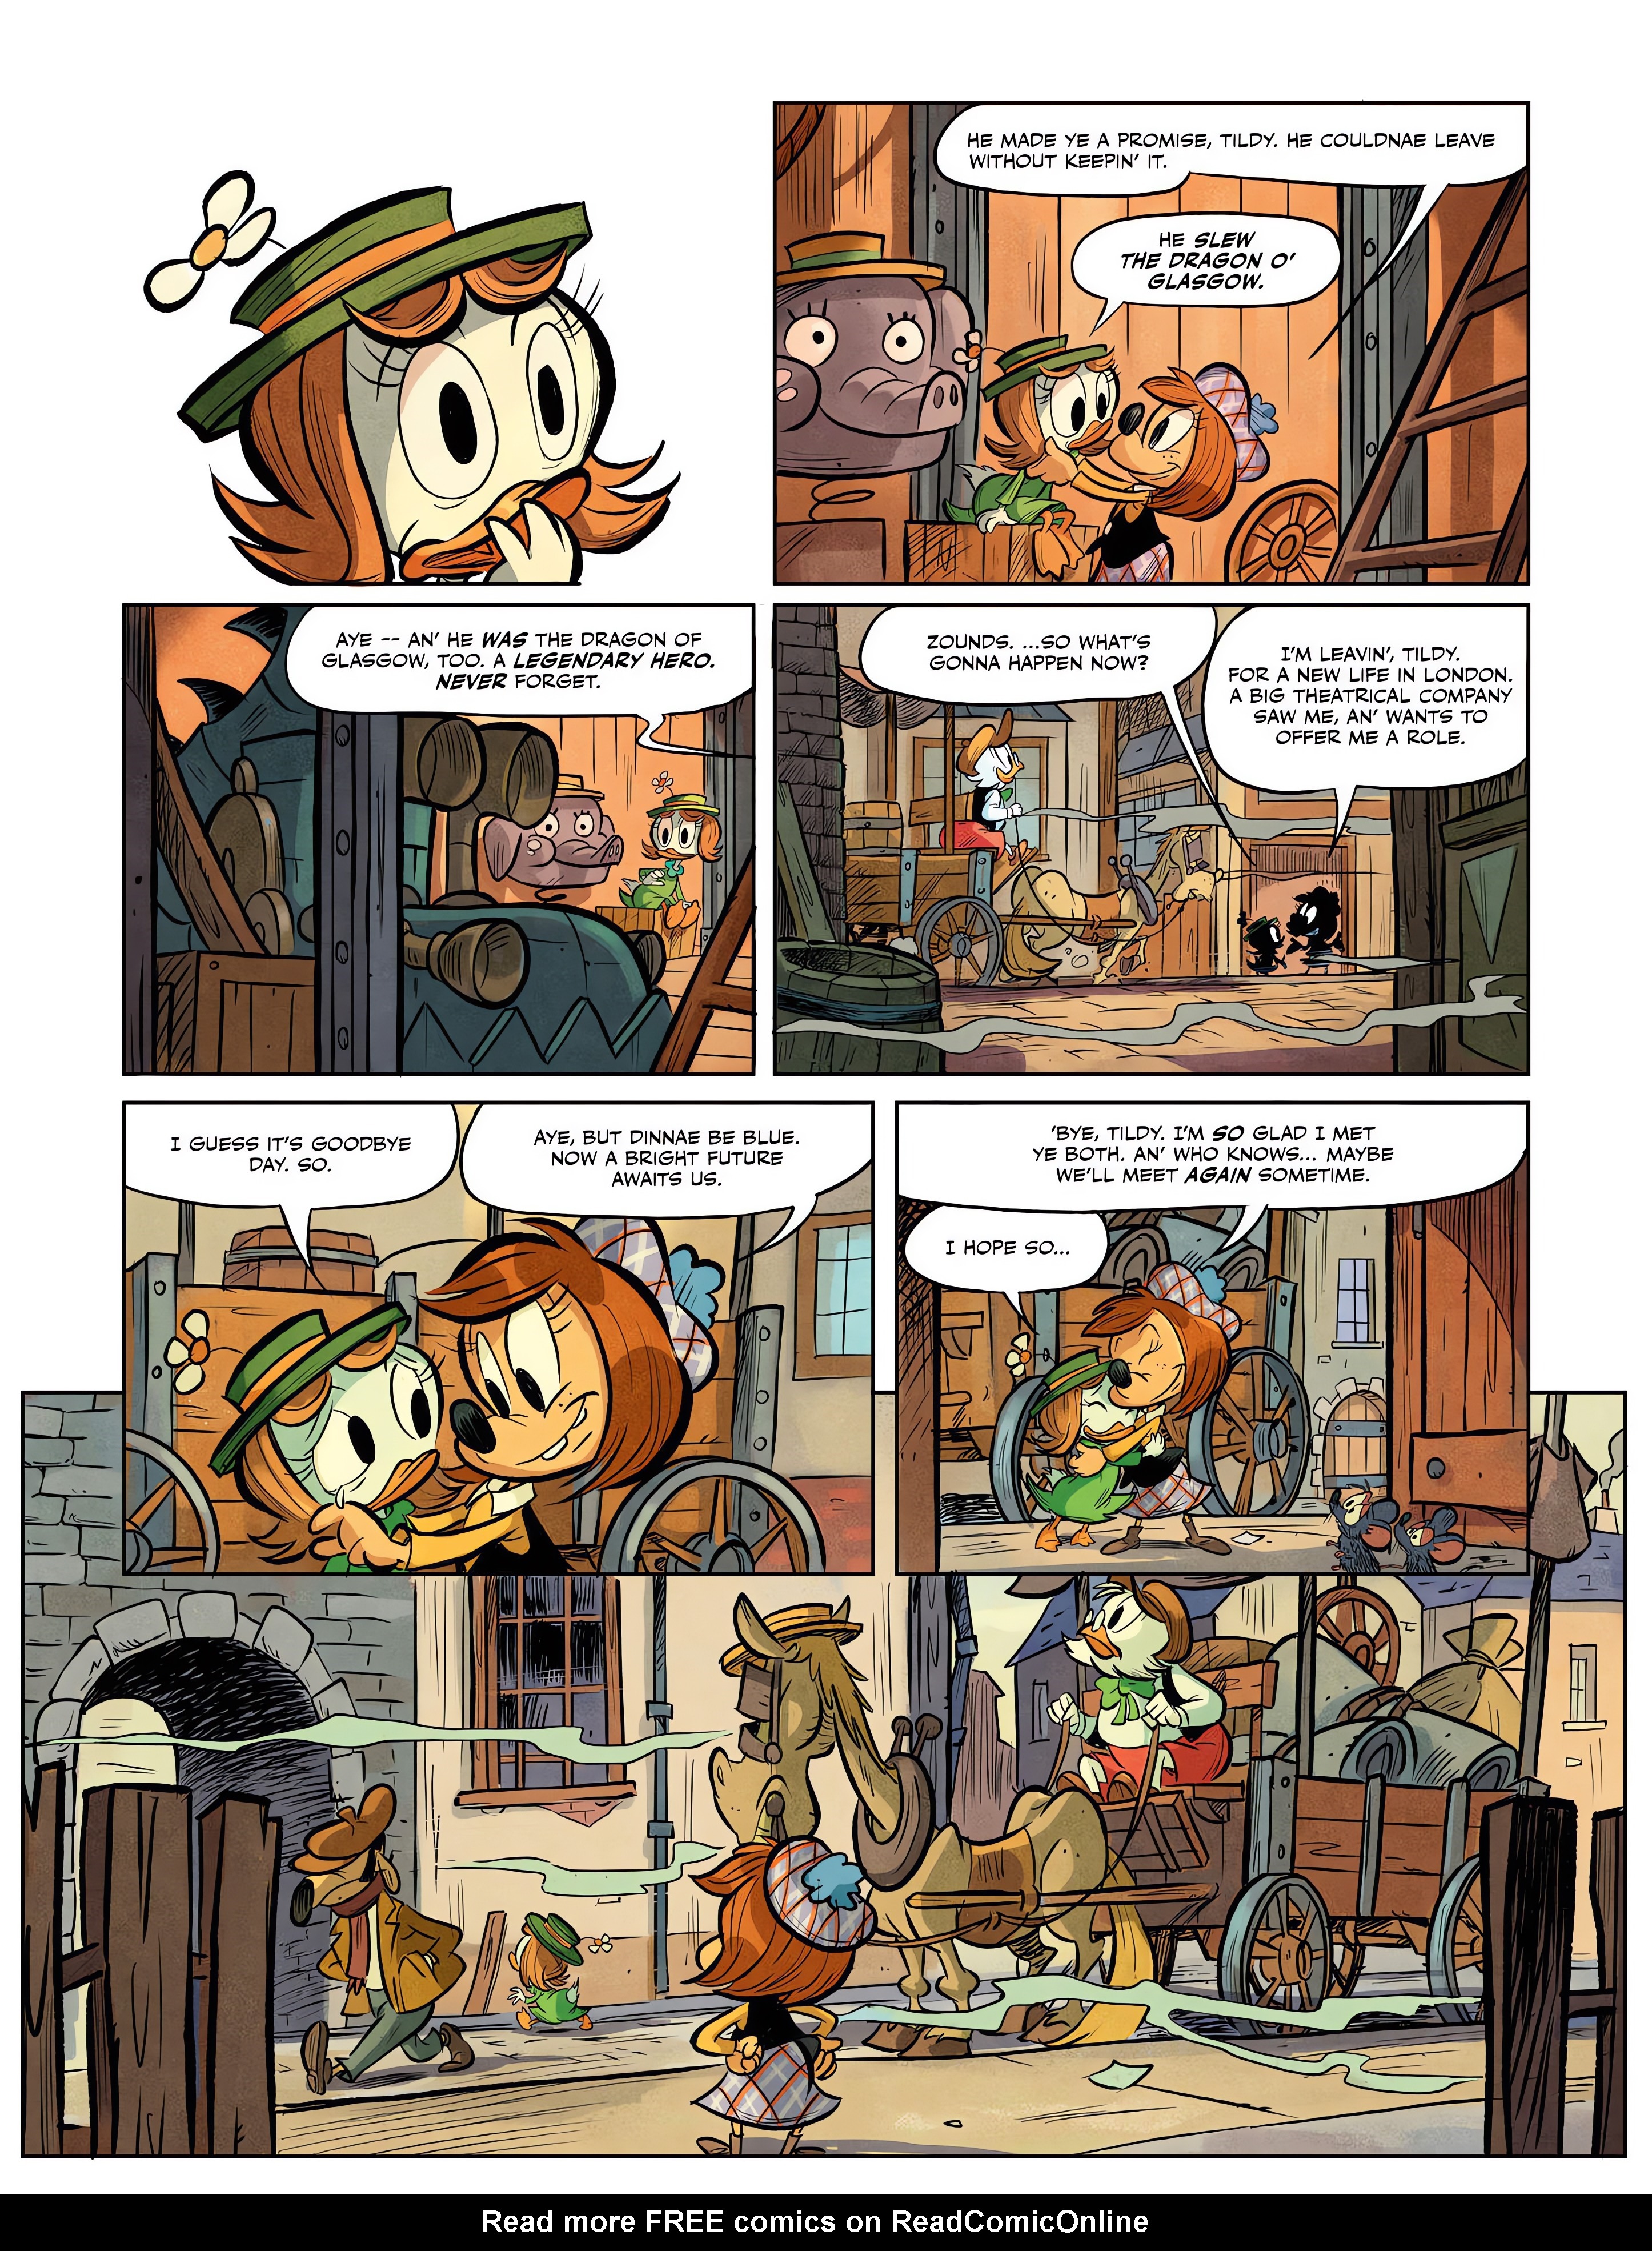 Read online Scrooge McDuck: The Dragon of Glasgow comic -  Issue # Full - 54